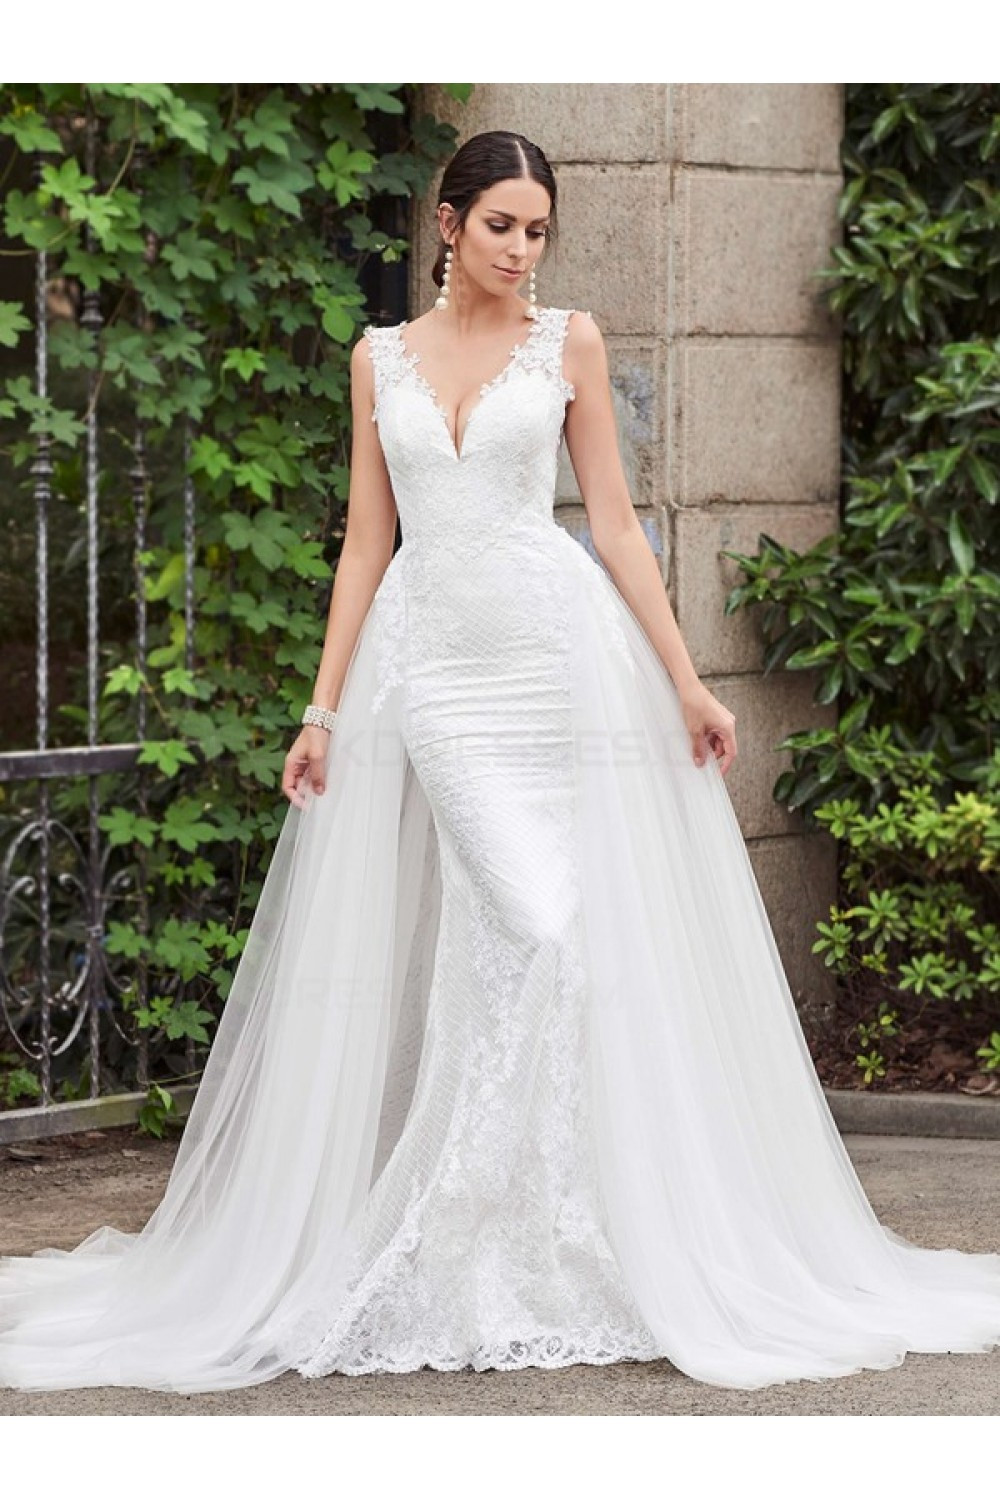 Lace Designer Wedding Gowns
 Mermaid Lace Tulle V Neck Wedding Dresses Bridal Gowns